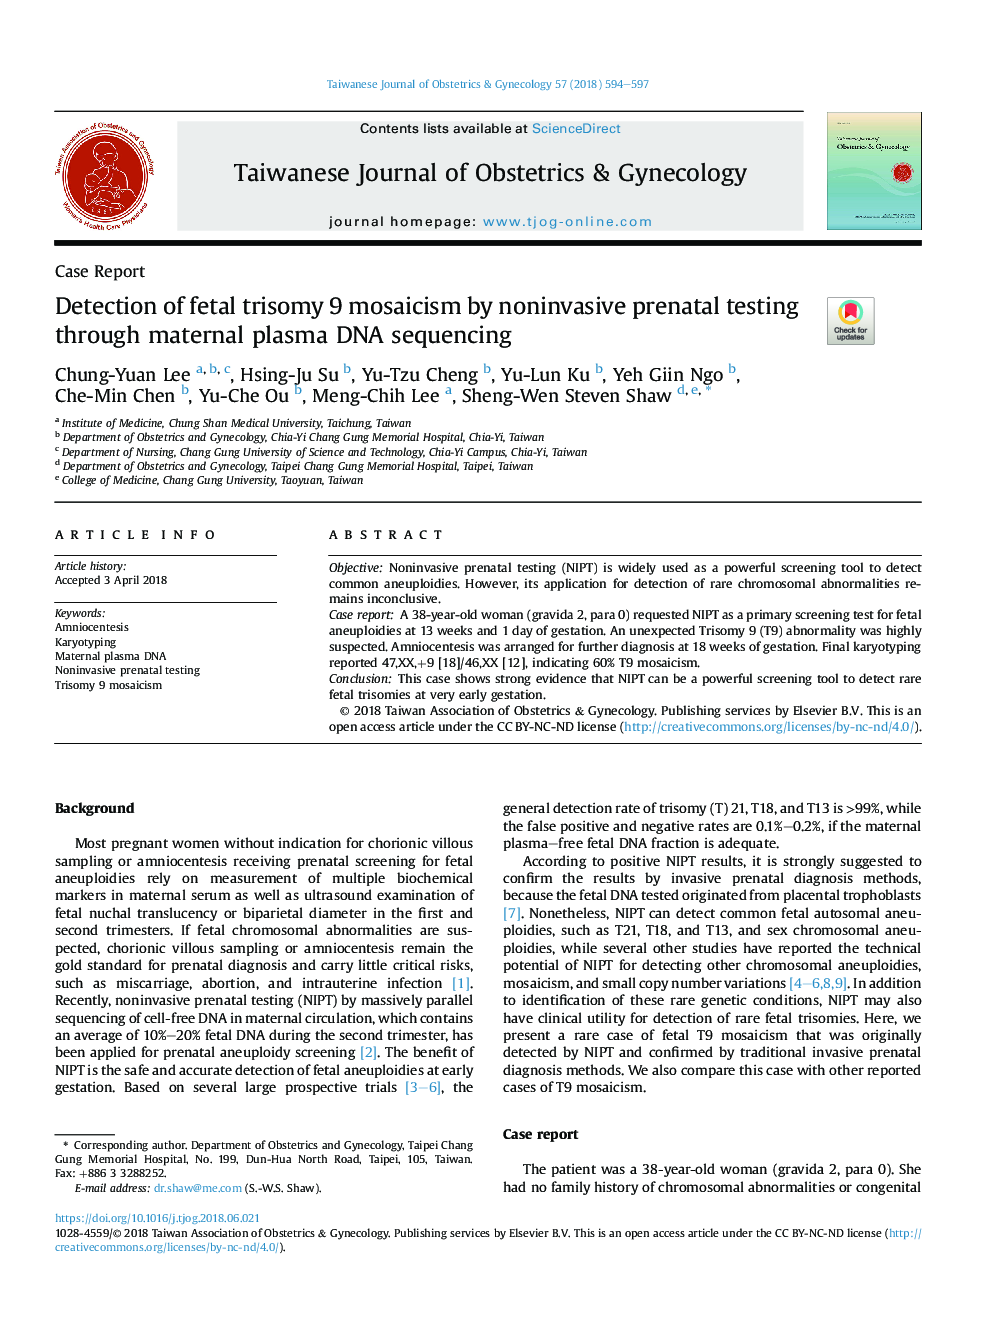 Detection of fetal trisomy 9 mosaicism by noninvasive prenatal testing through maternal plasma DNA sequencing